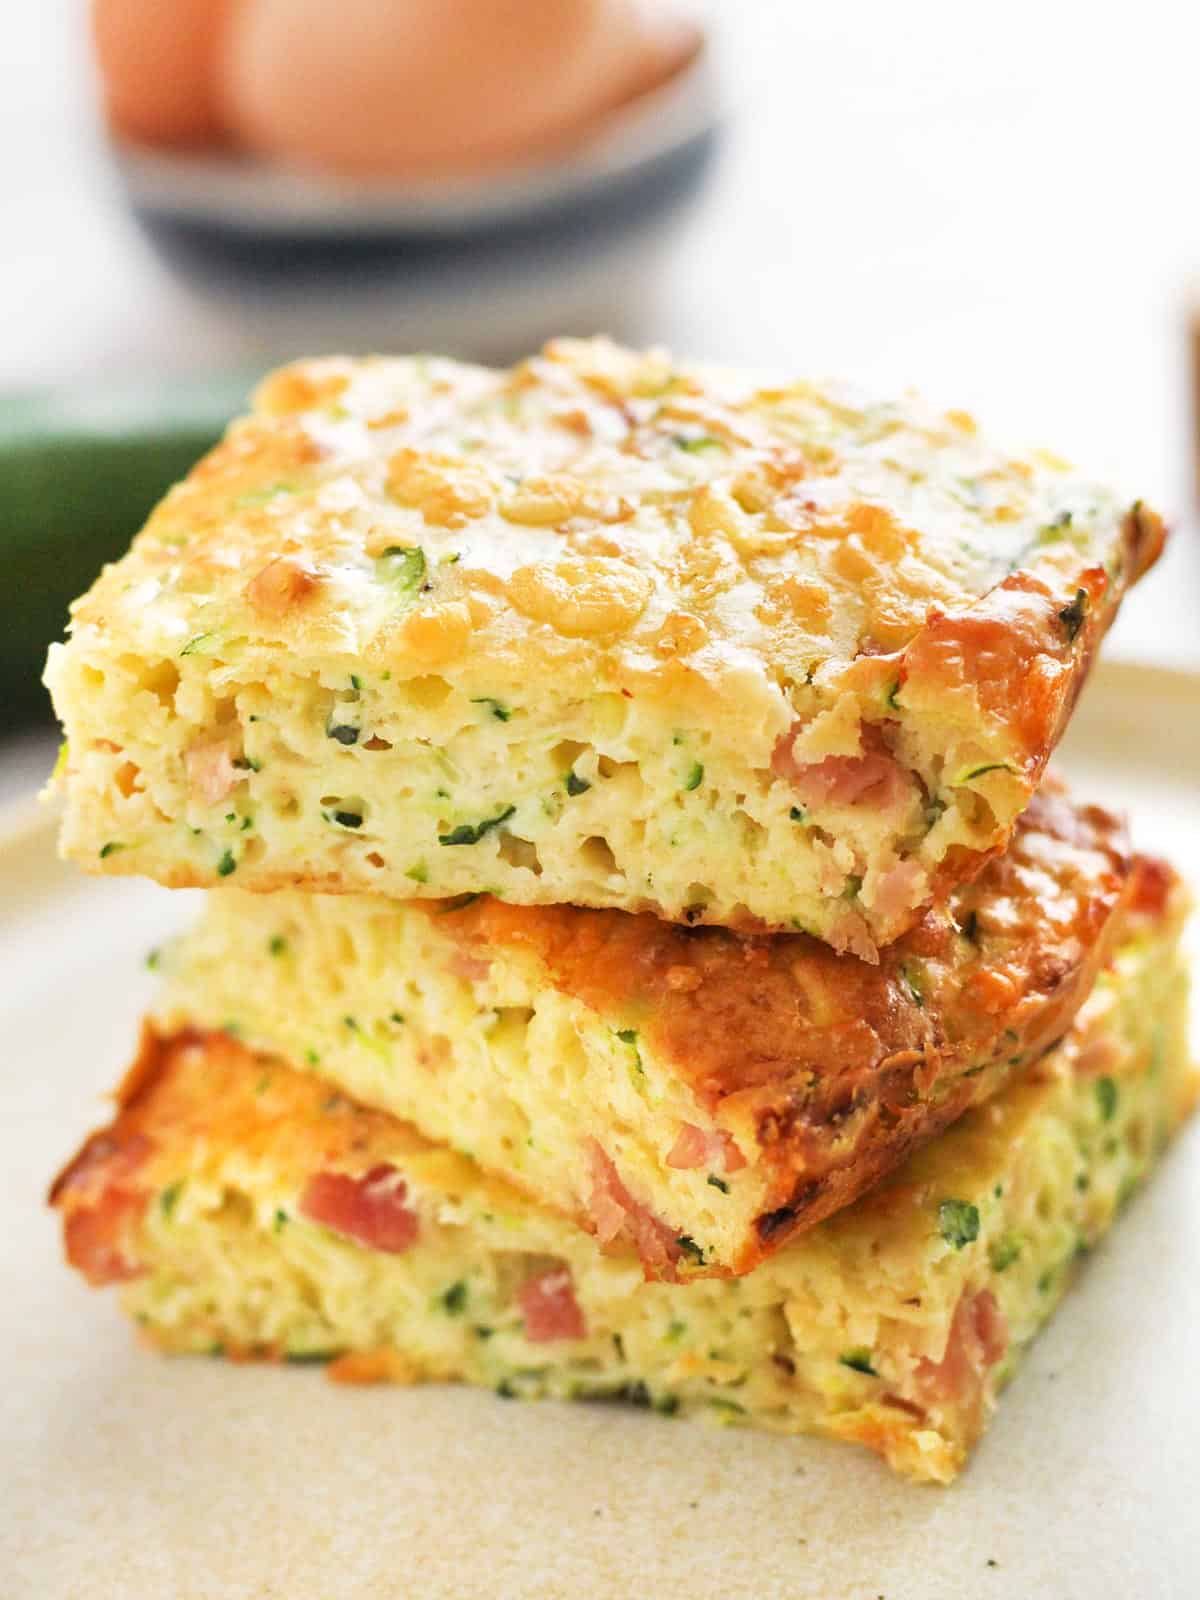 A stack of slices of zucchini slice on a plate.